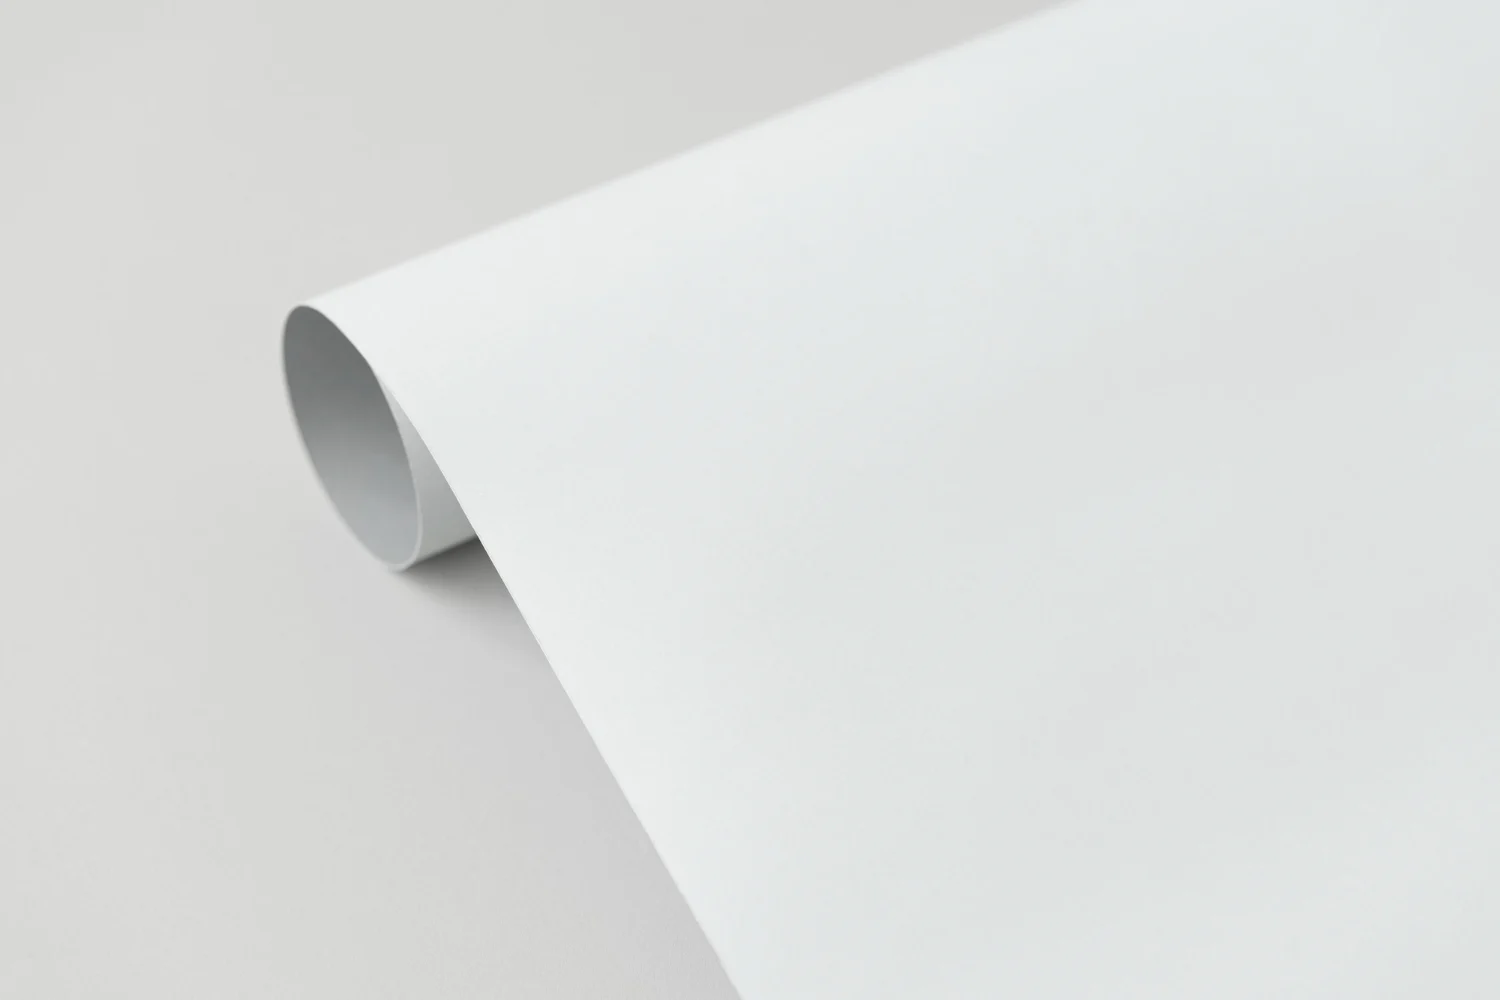 A roll of white paper on a white surface.